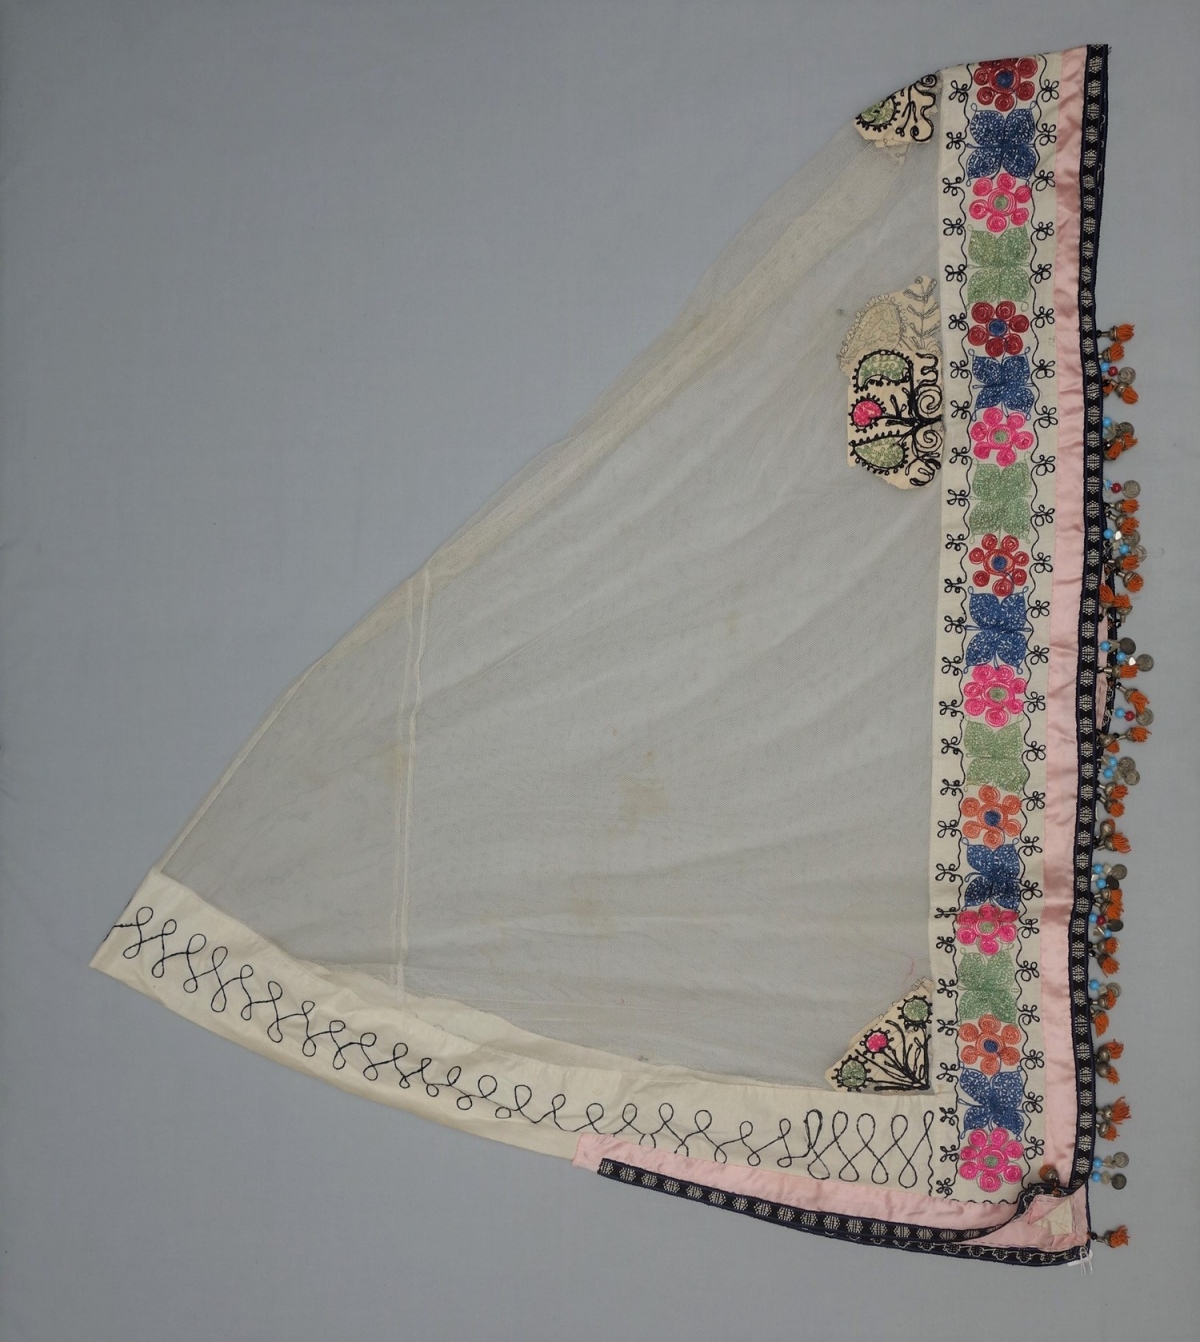 Embroidered bridal veil from Uzbekistan, late 20th century.